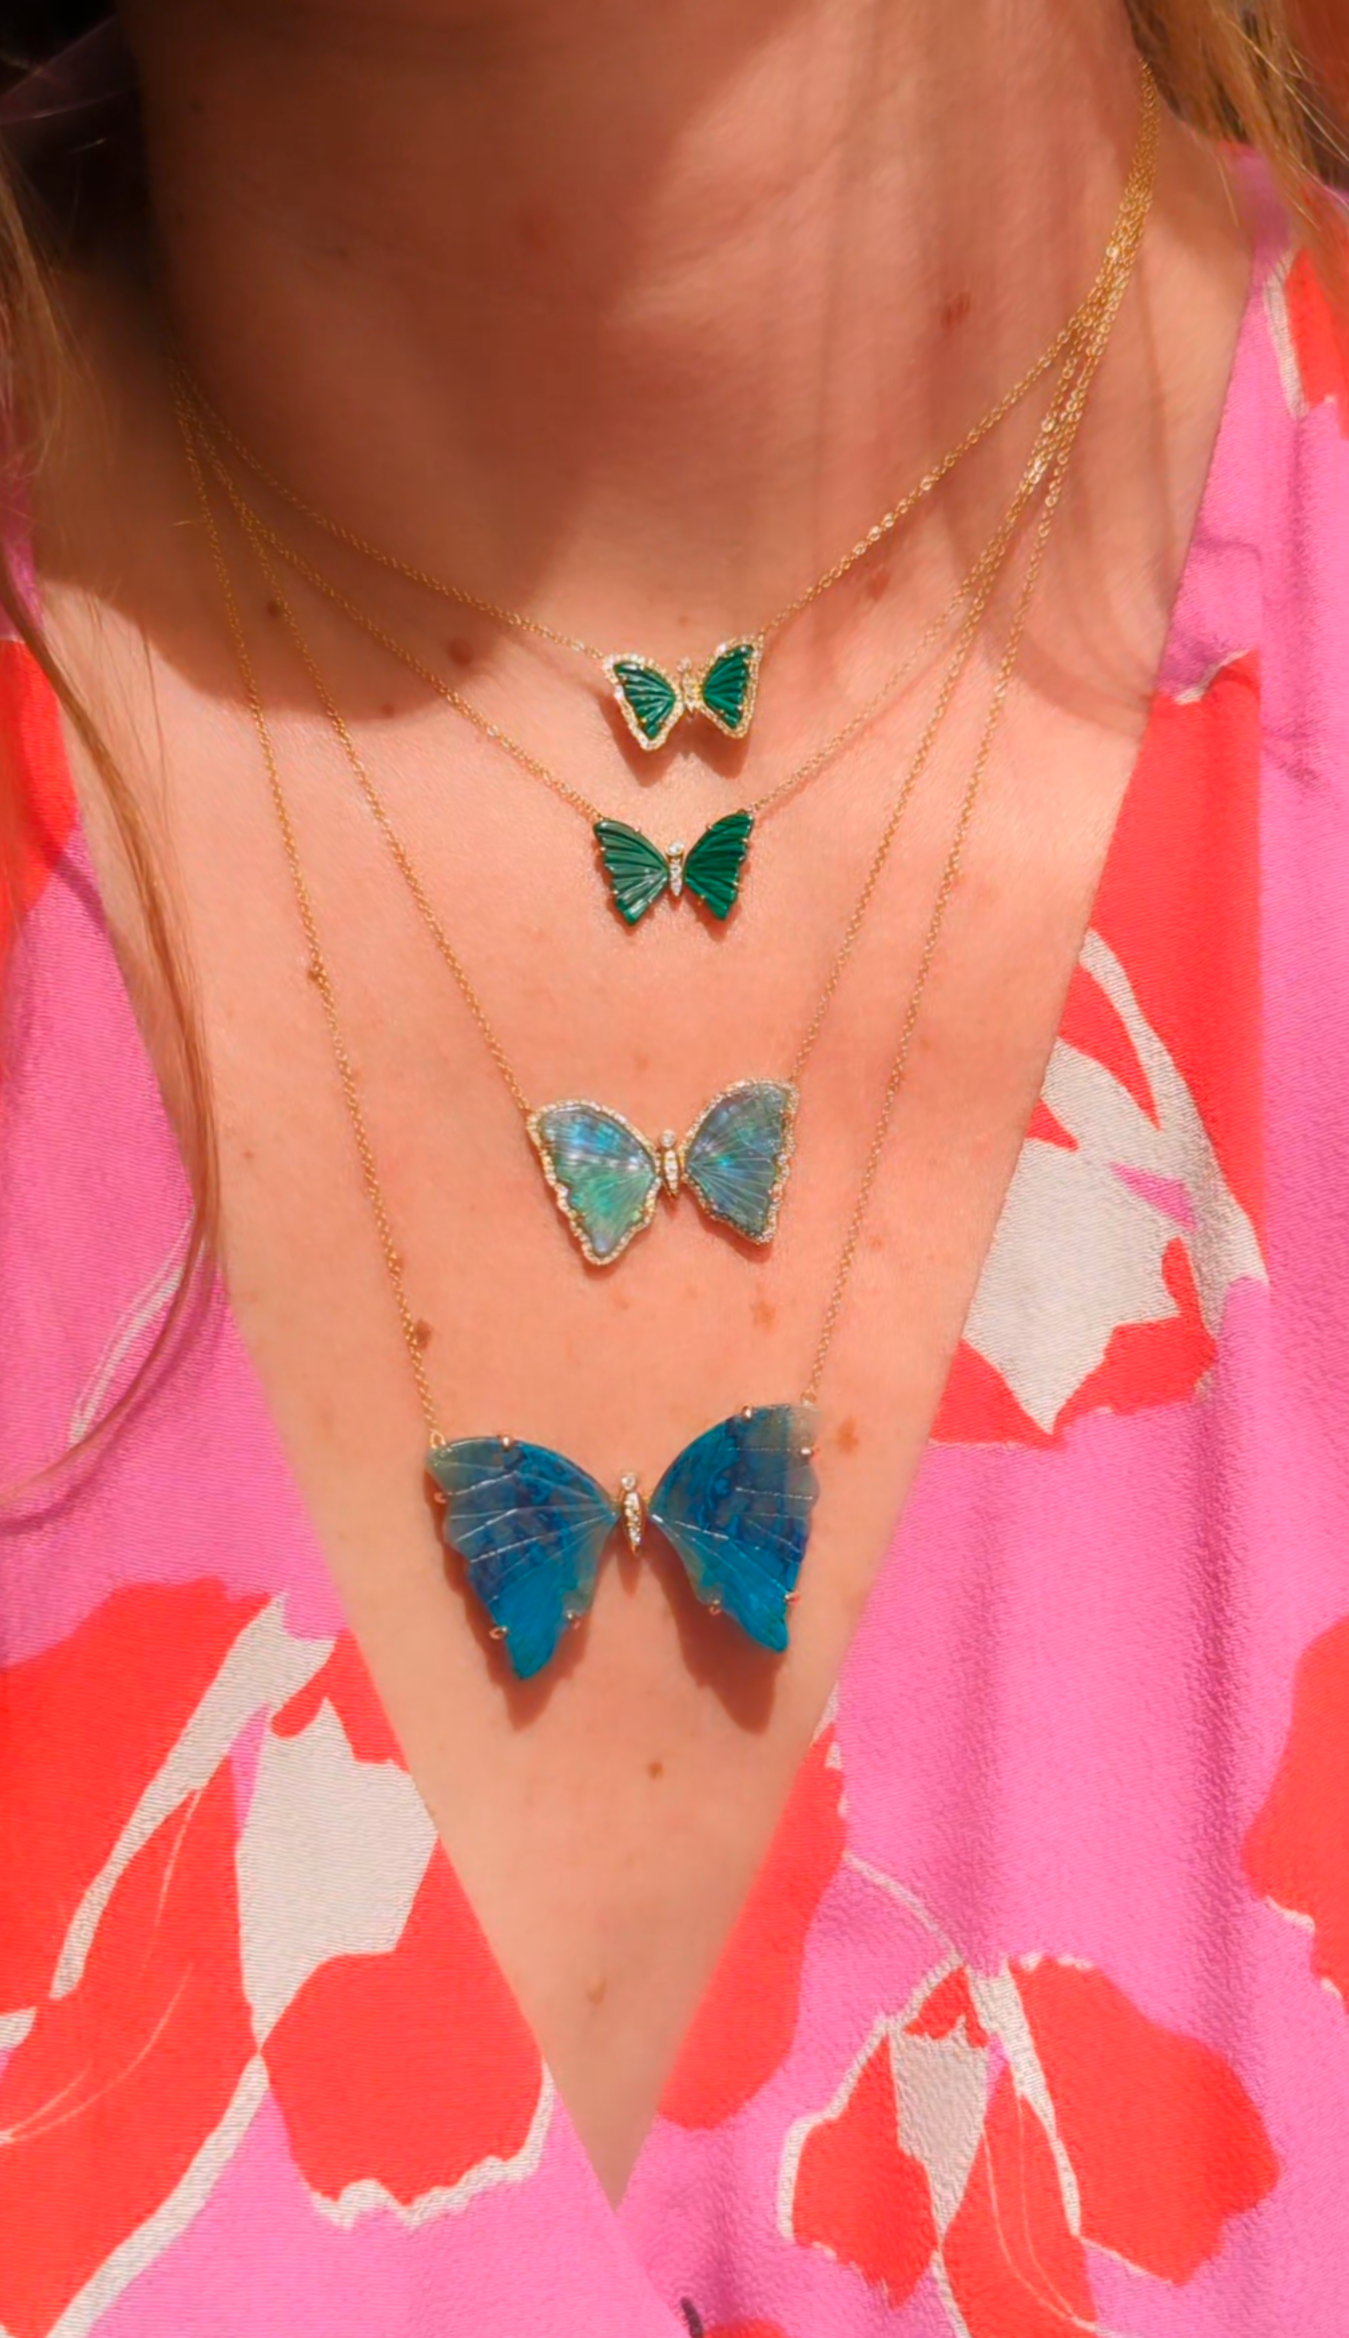 mini chrysocolla butterfly necklace with diamonds